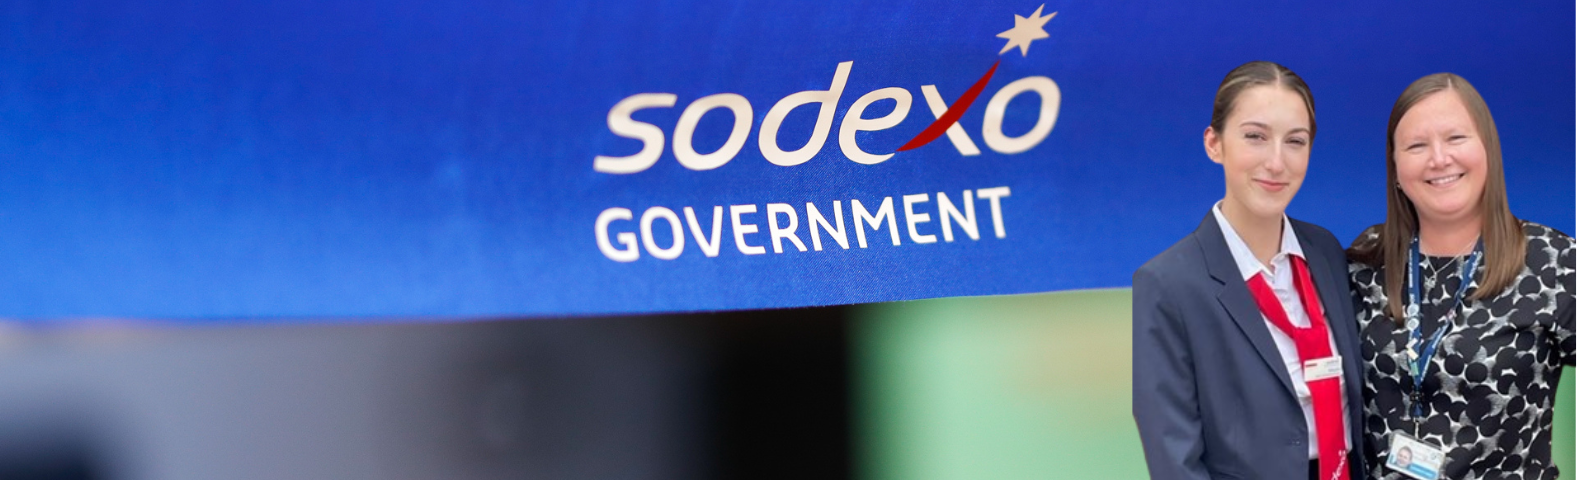 mom and daughter together in front of the Sodexo Government's logo